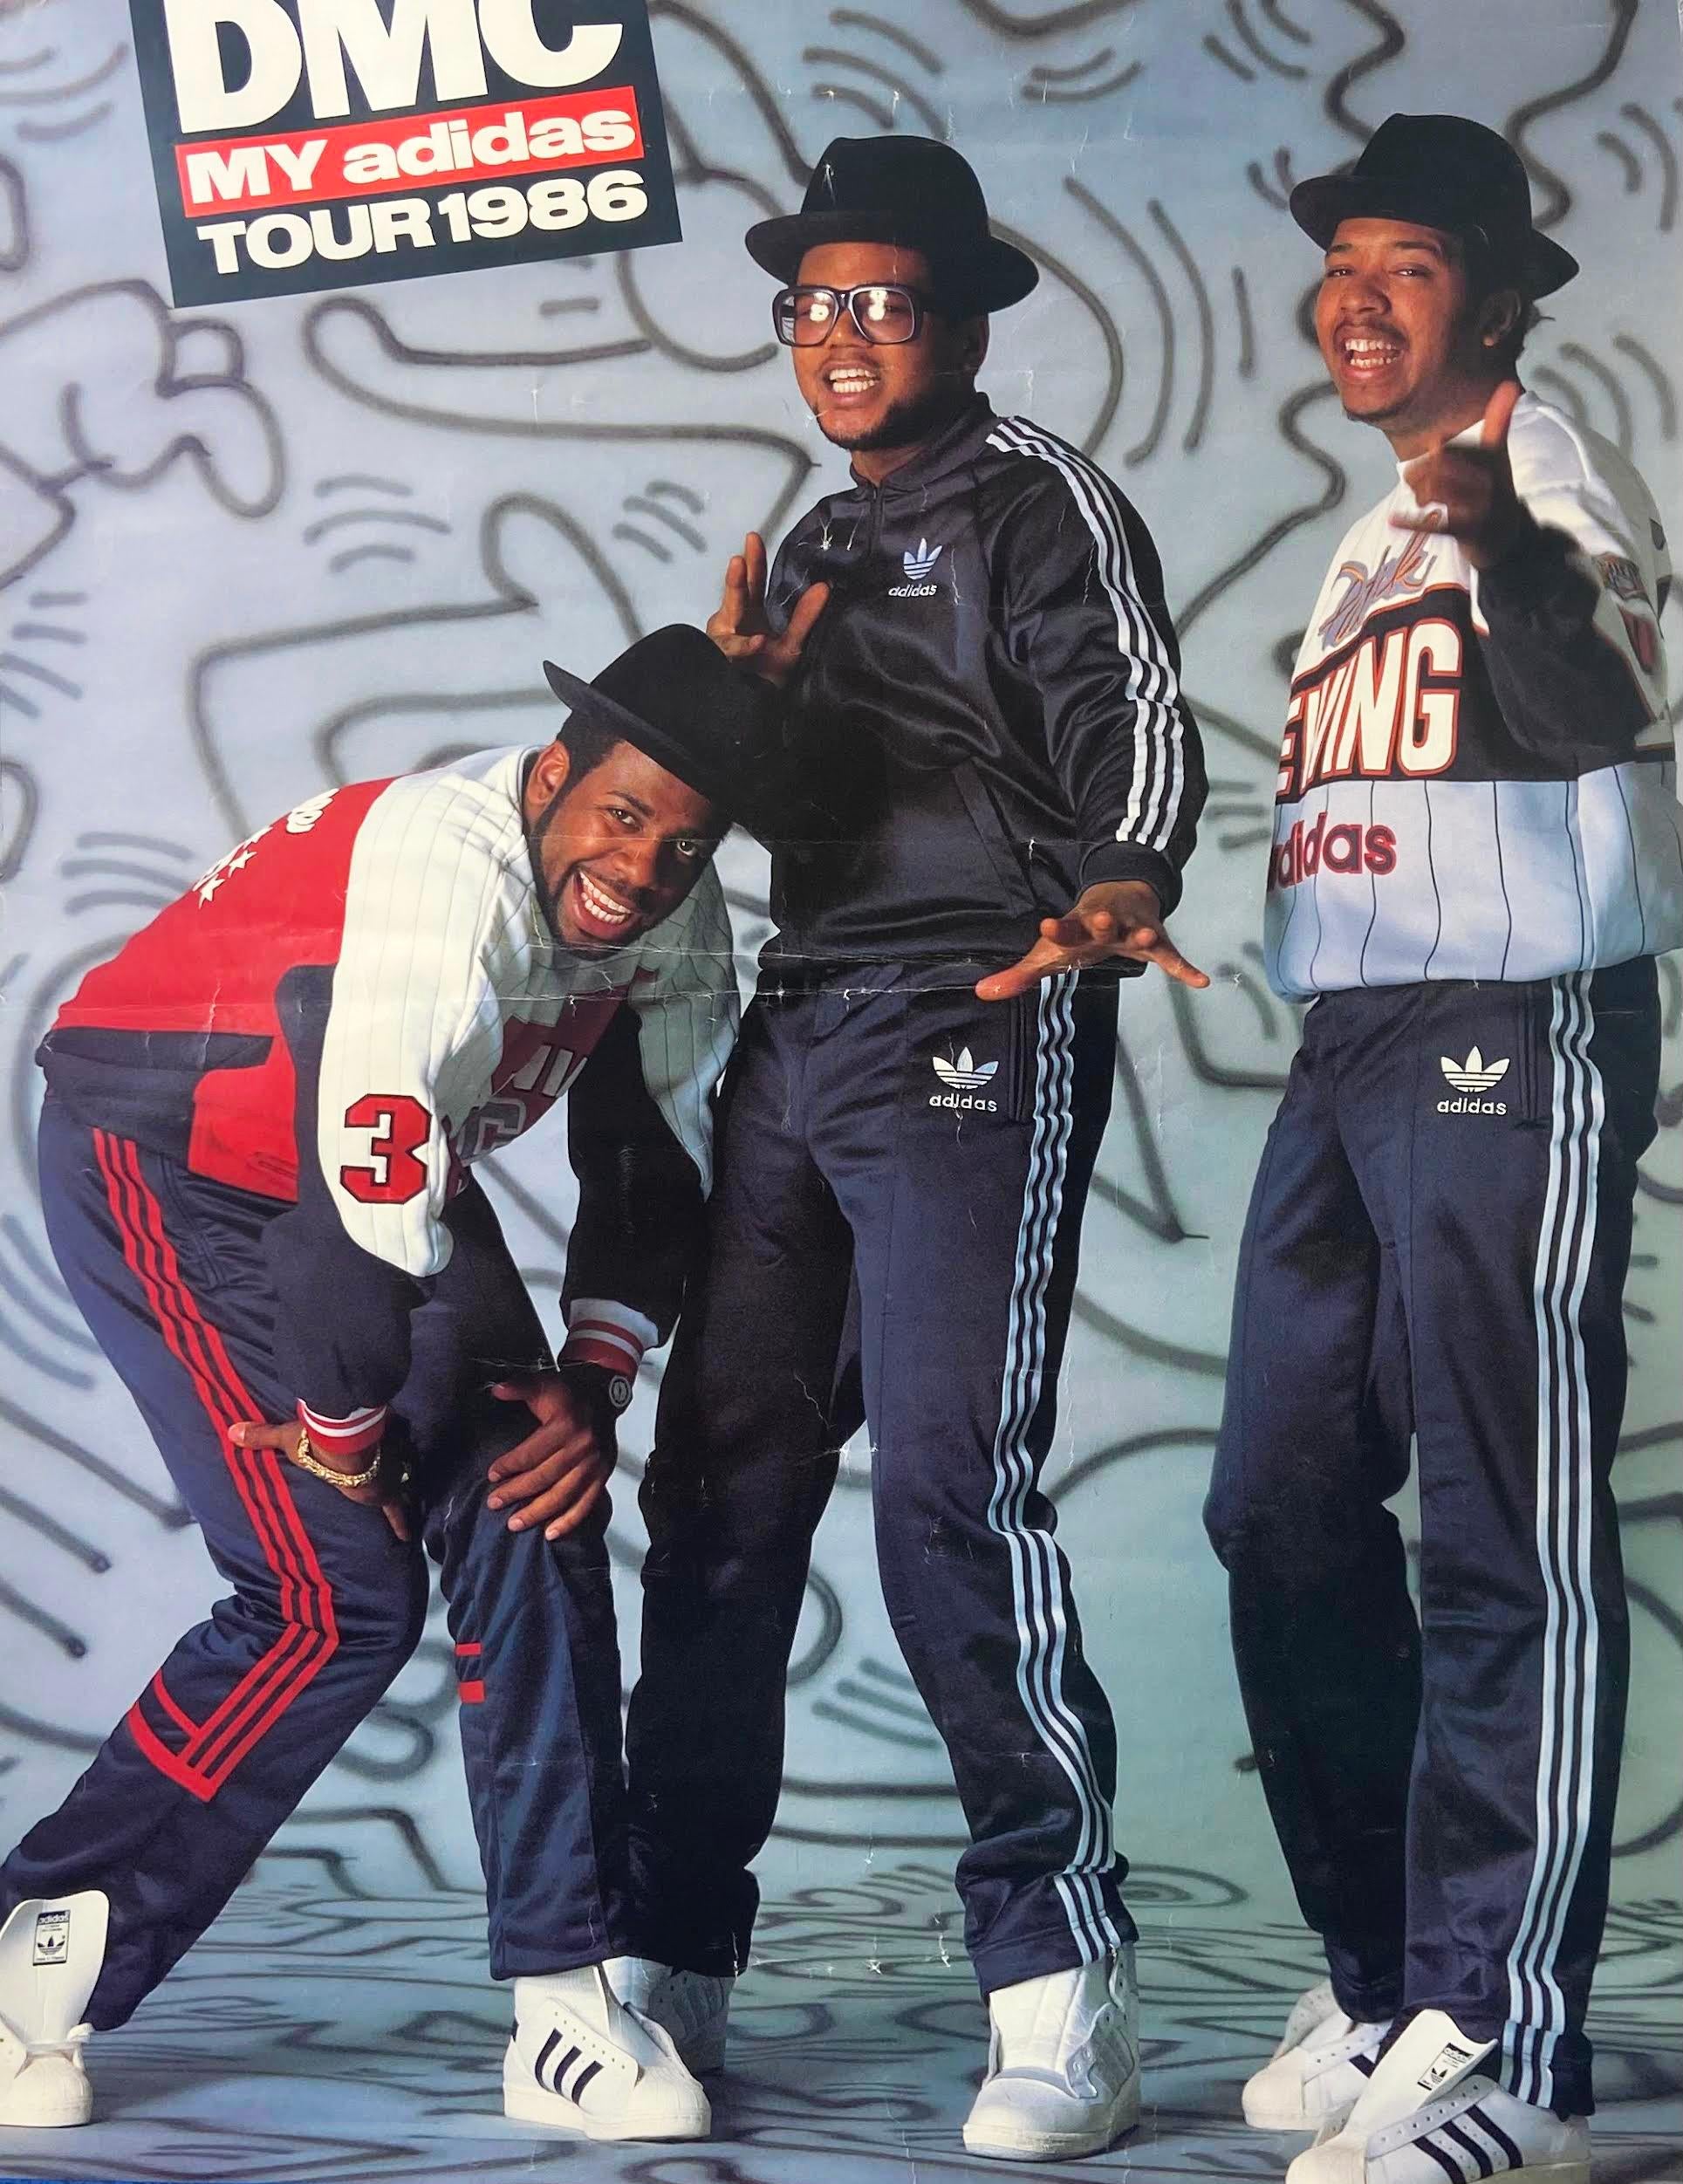 Keith Haring Run DMC Adidas Poster 1986:
Rare original Keith Haring designed and illustrated Run DMC promotional poster published in collaboration with Adidas and Keith Haring. The New York based band Run DMC was one of the first hip-hop and rap